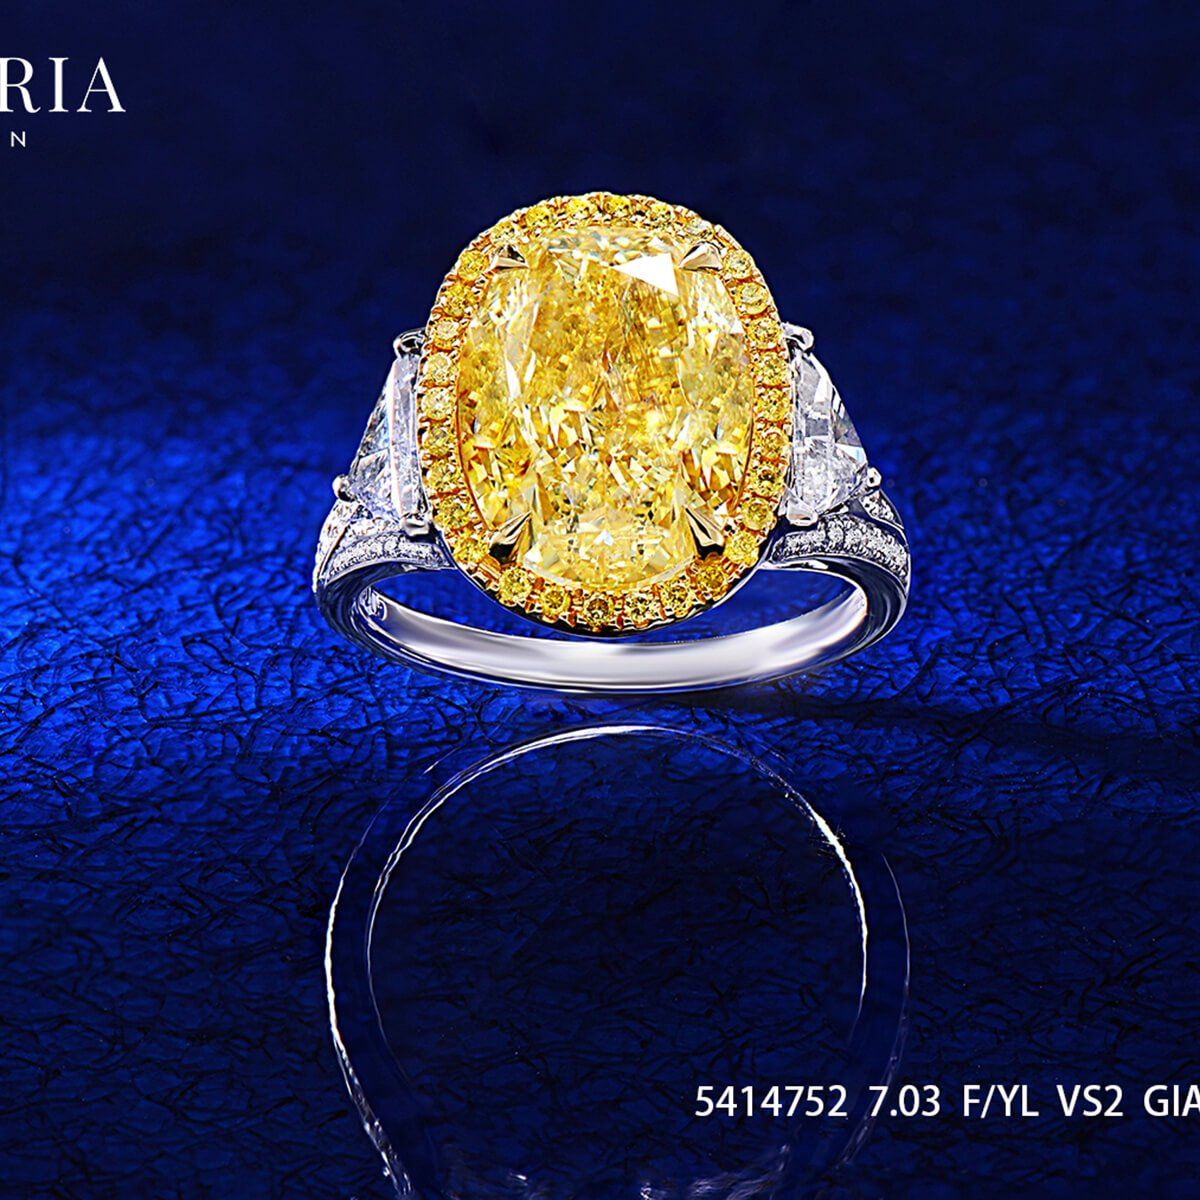 Fancy Yellow Diamond Ring, 7.03 Ct. (8.22 Ct. TW), Oval shape, GIA Certified, 2185059309